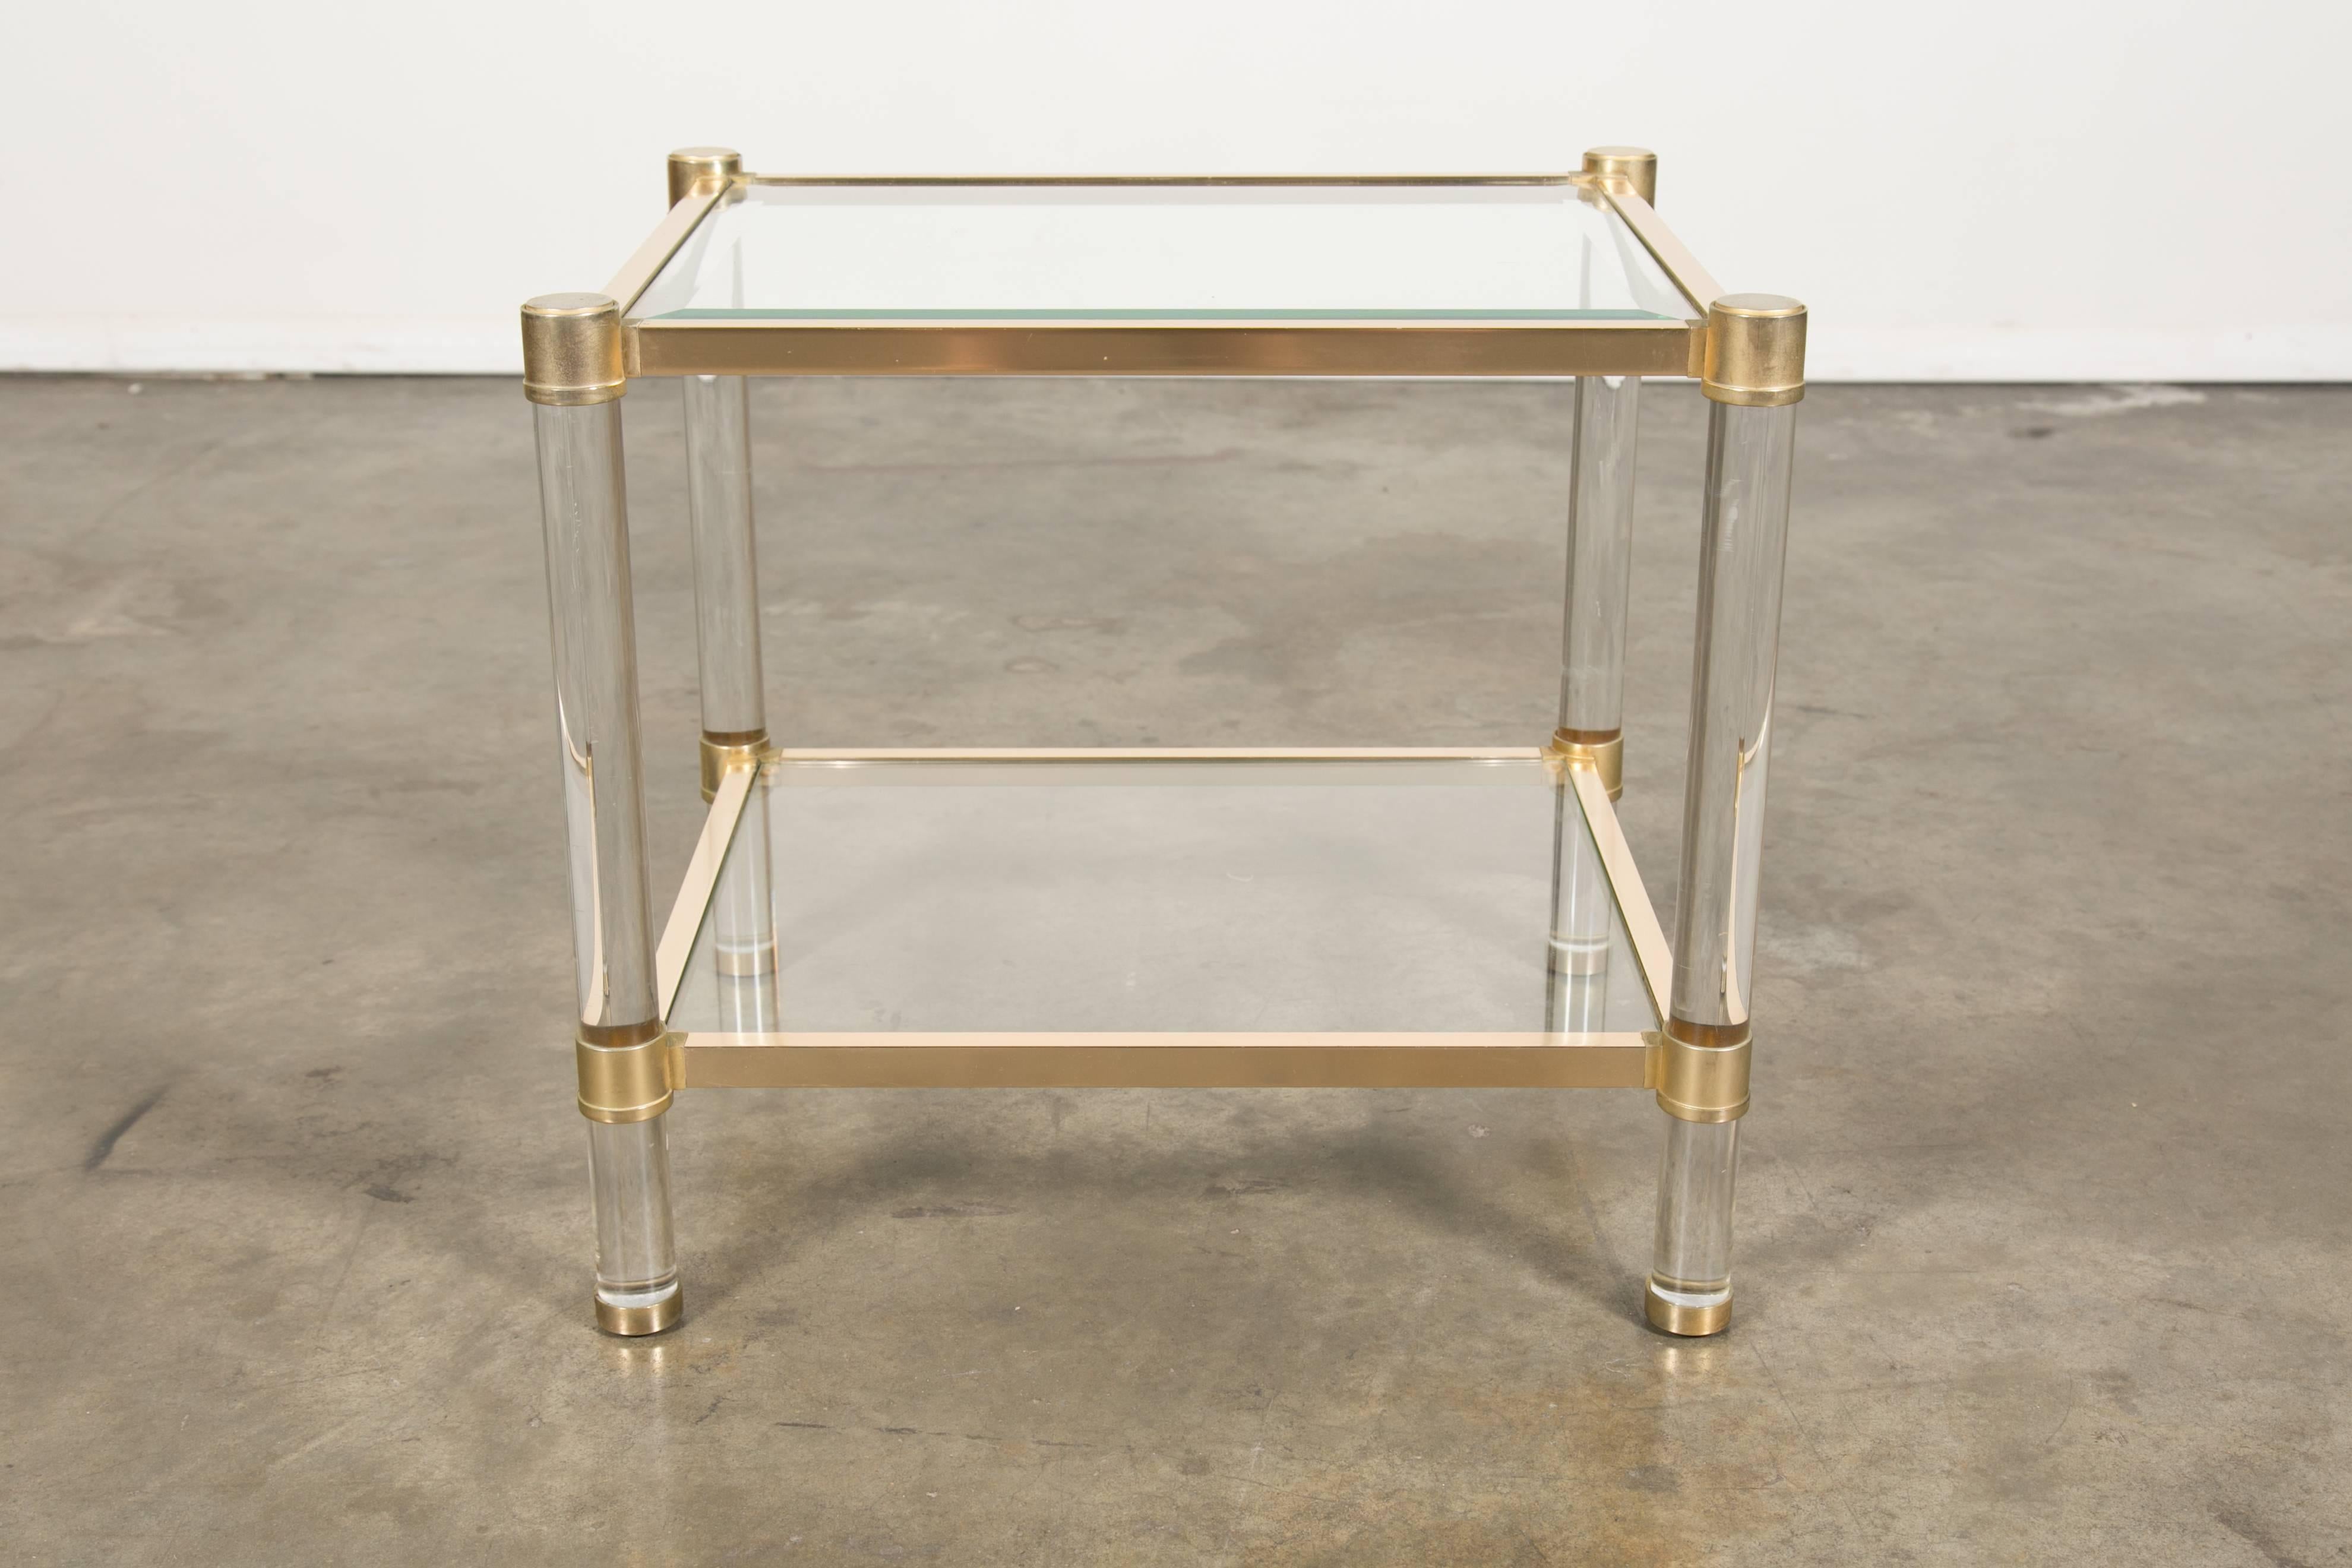 French two-tier Lucite and brass rectangular side table with beveled glass top and lower glass shelf. circa 1970s. Attributed to the famous Paris atelier Maison Jansen, this table looks beautiful mixed with antiques or contemporary decor. It's a